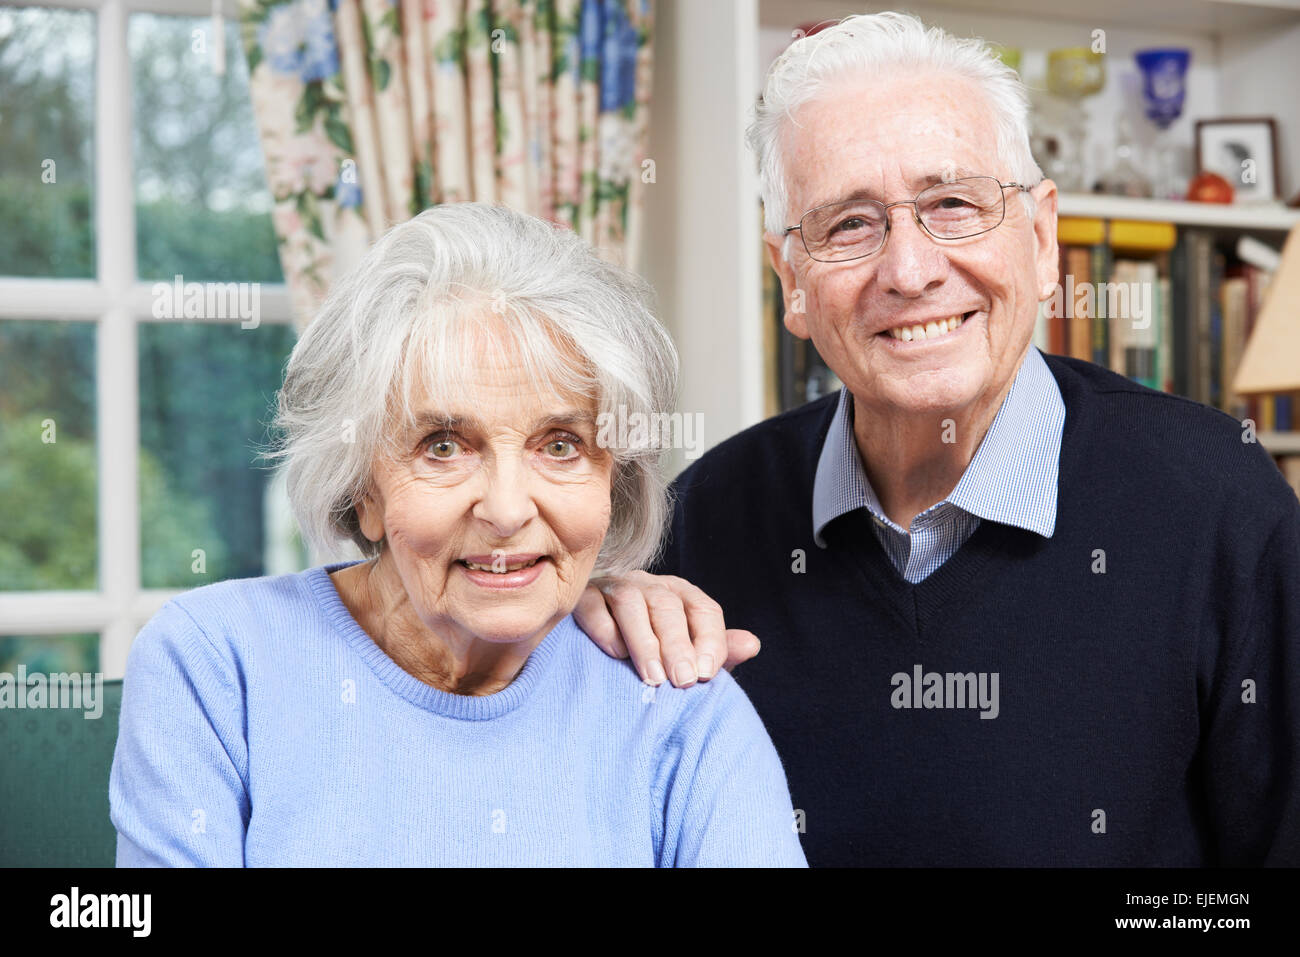 Portrait Of Happy Senior Couple At Home Together Banque D'Images